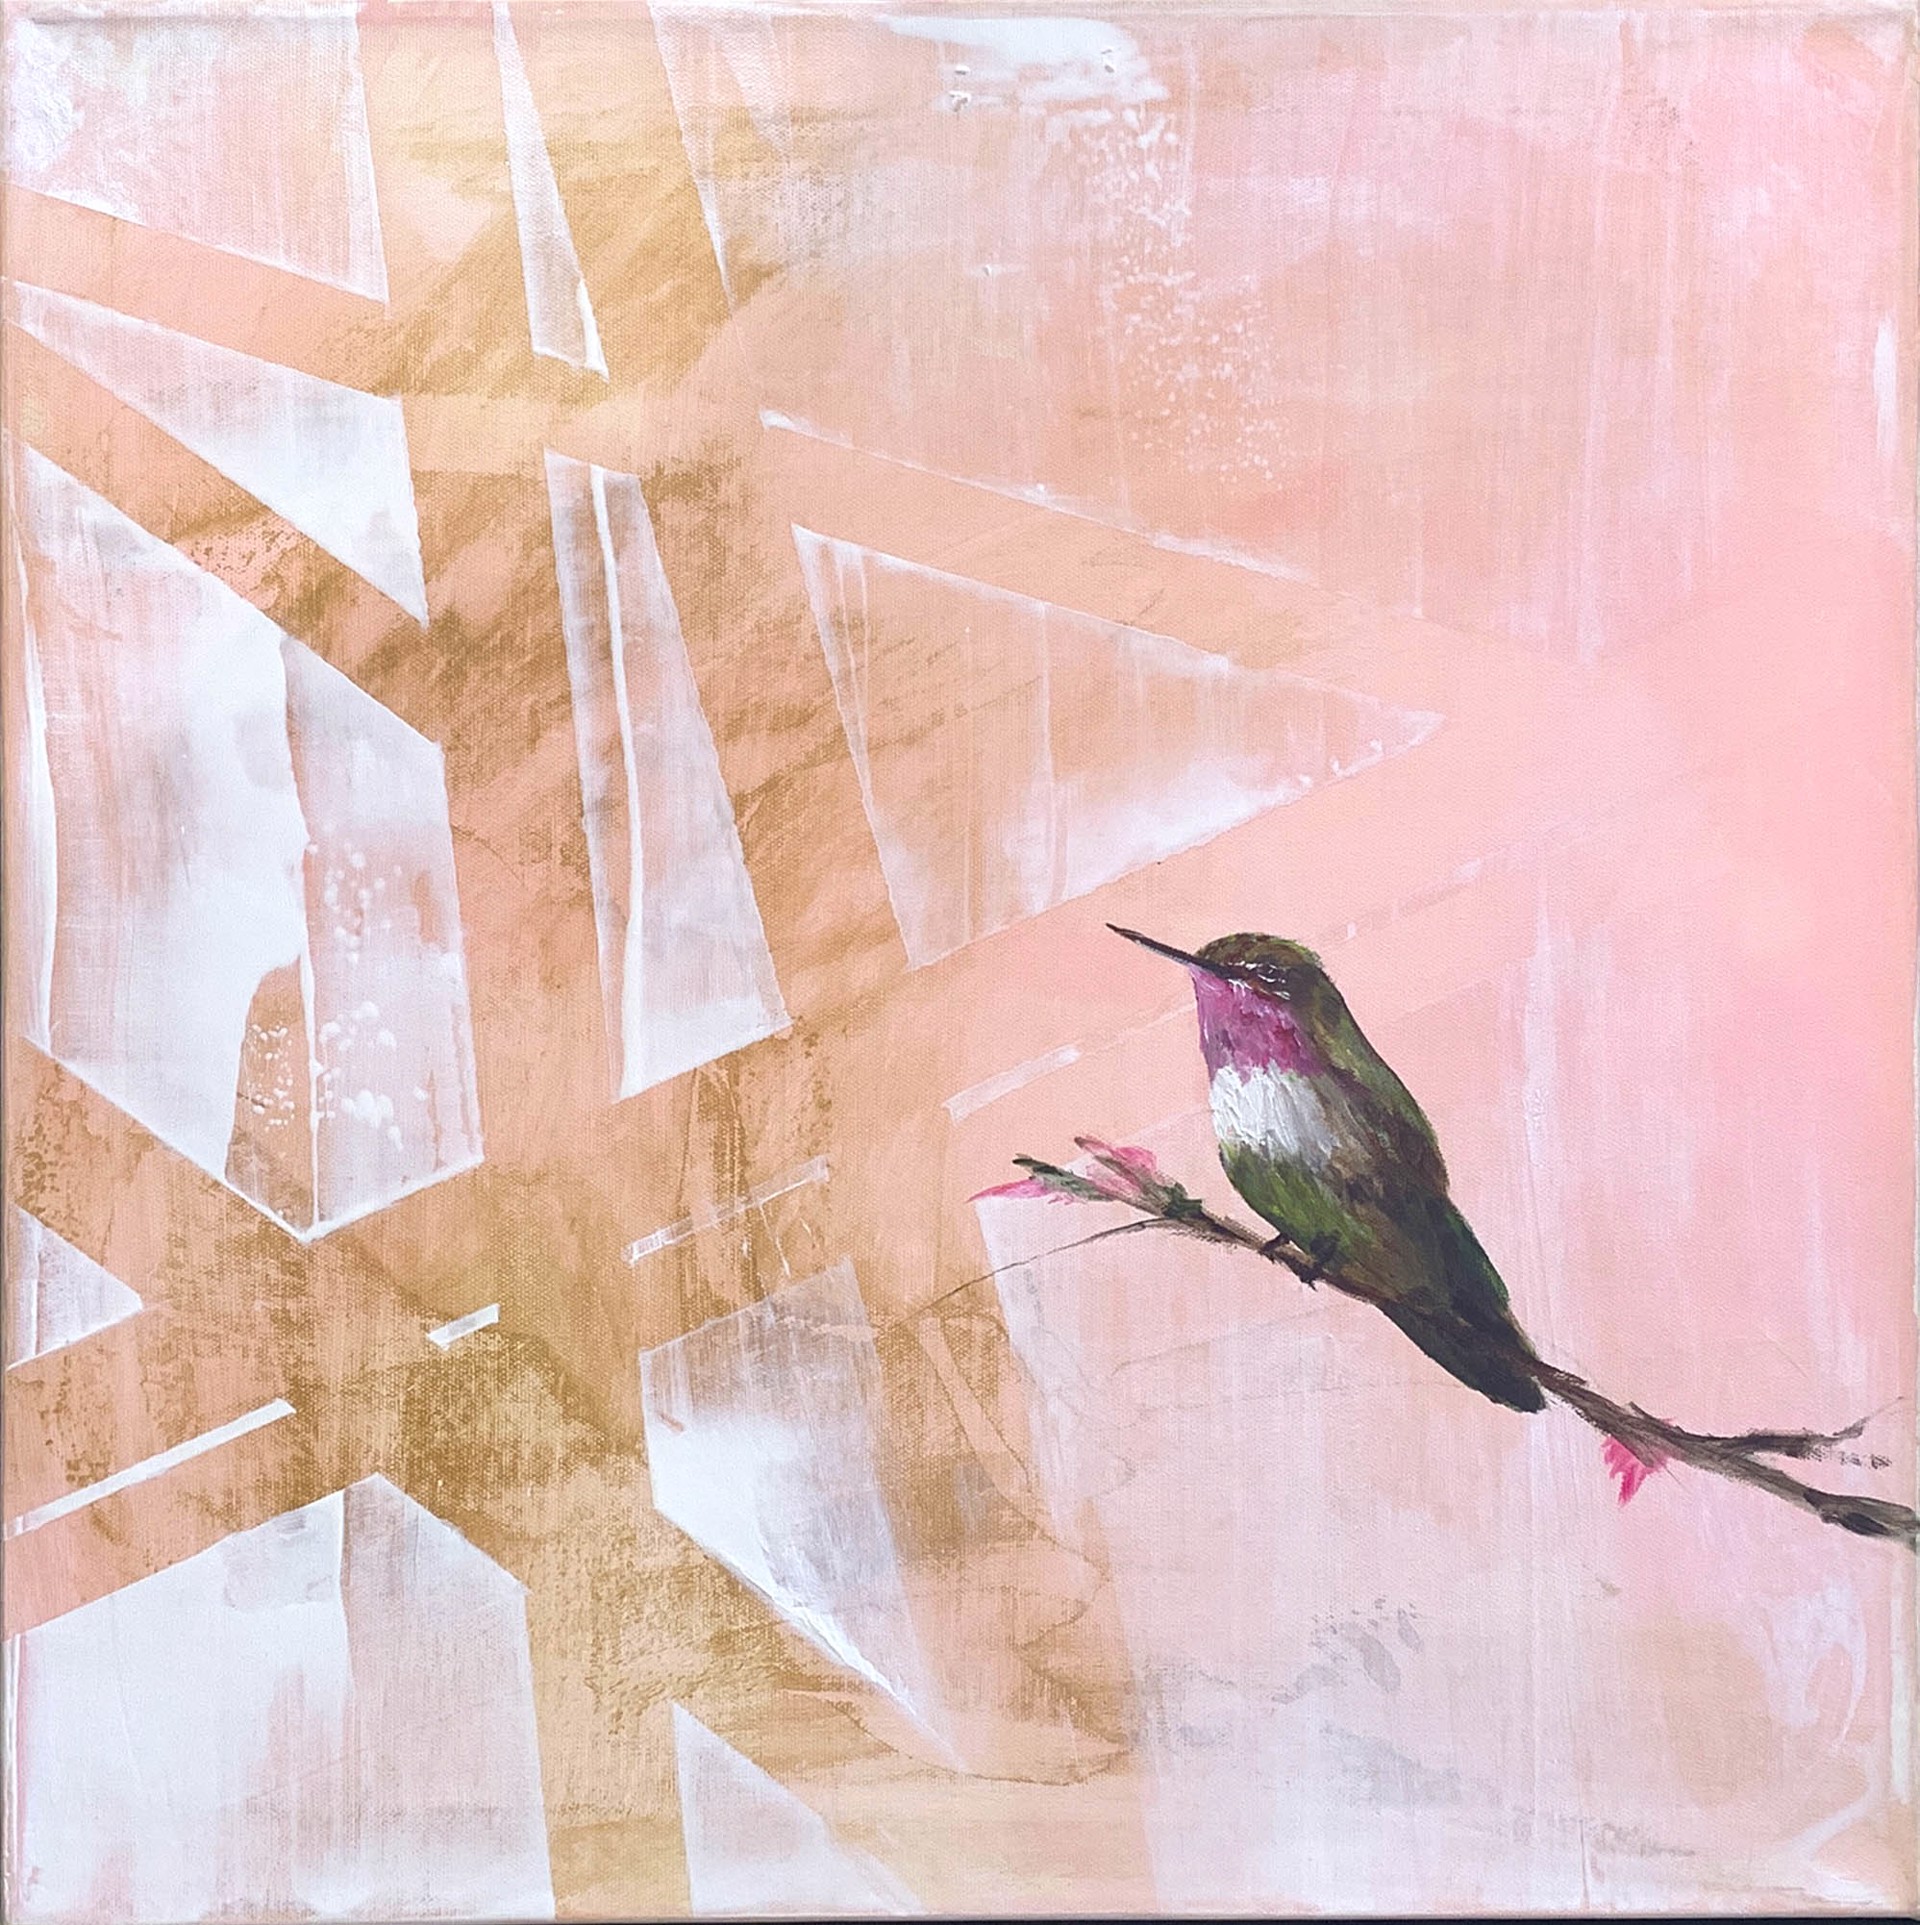 Original Oil Painting Featuring A Hummingbird Seated On A Branch Over Abstract Pink Background With Geometric Pattern